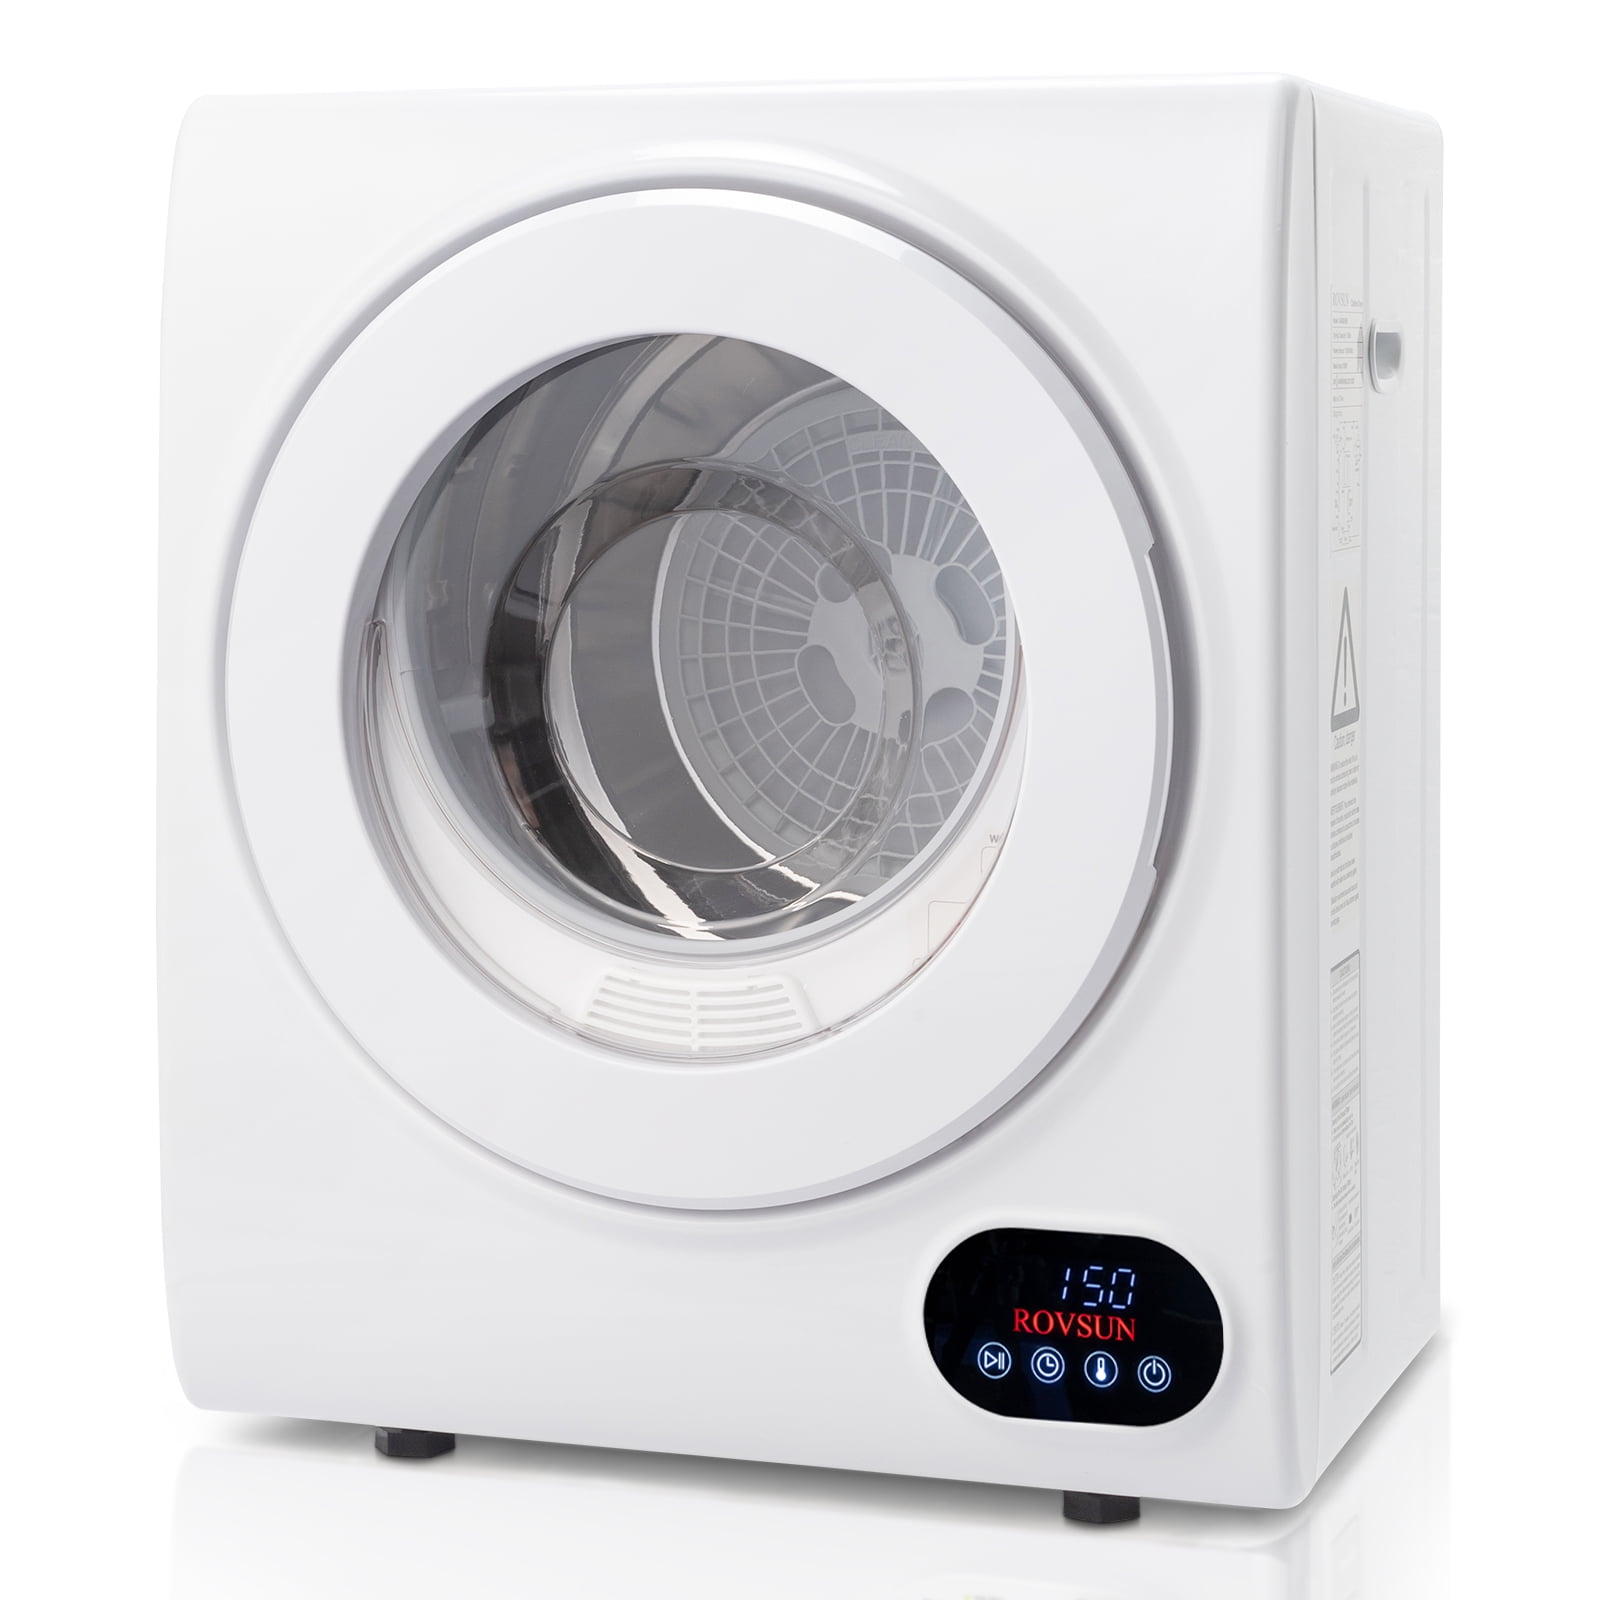 120V Portable Dryer,Portable Dryer Machine for Clothes,High End Laundry  Front Load Tumble Dryer Machine with Stainless Steel Tub & Touch Control  Screen for Apartment,Dorm-1500W